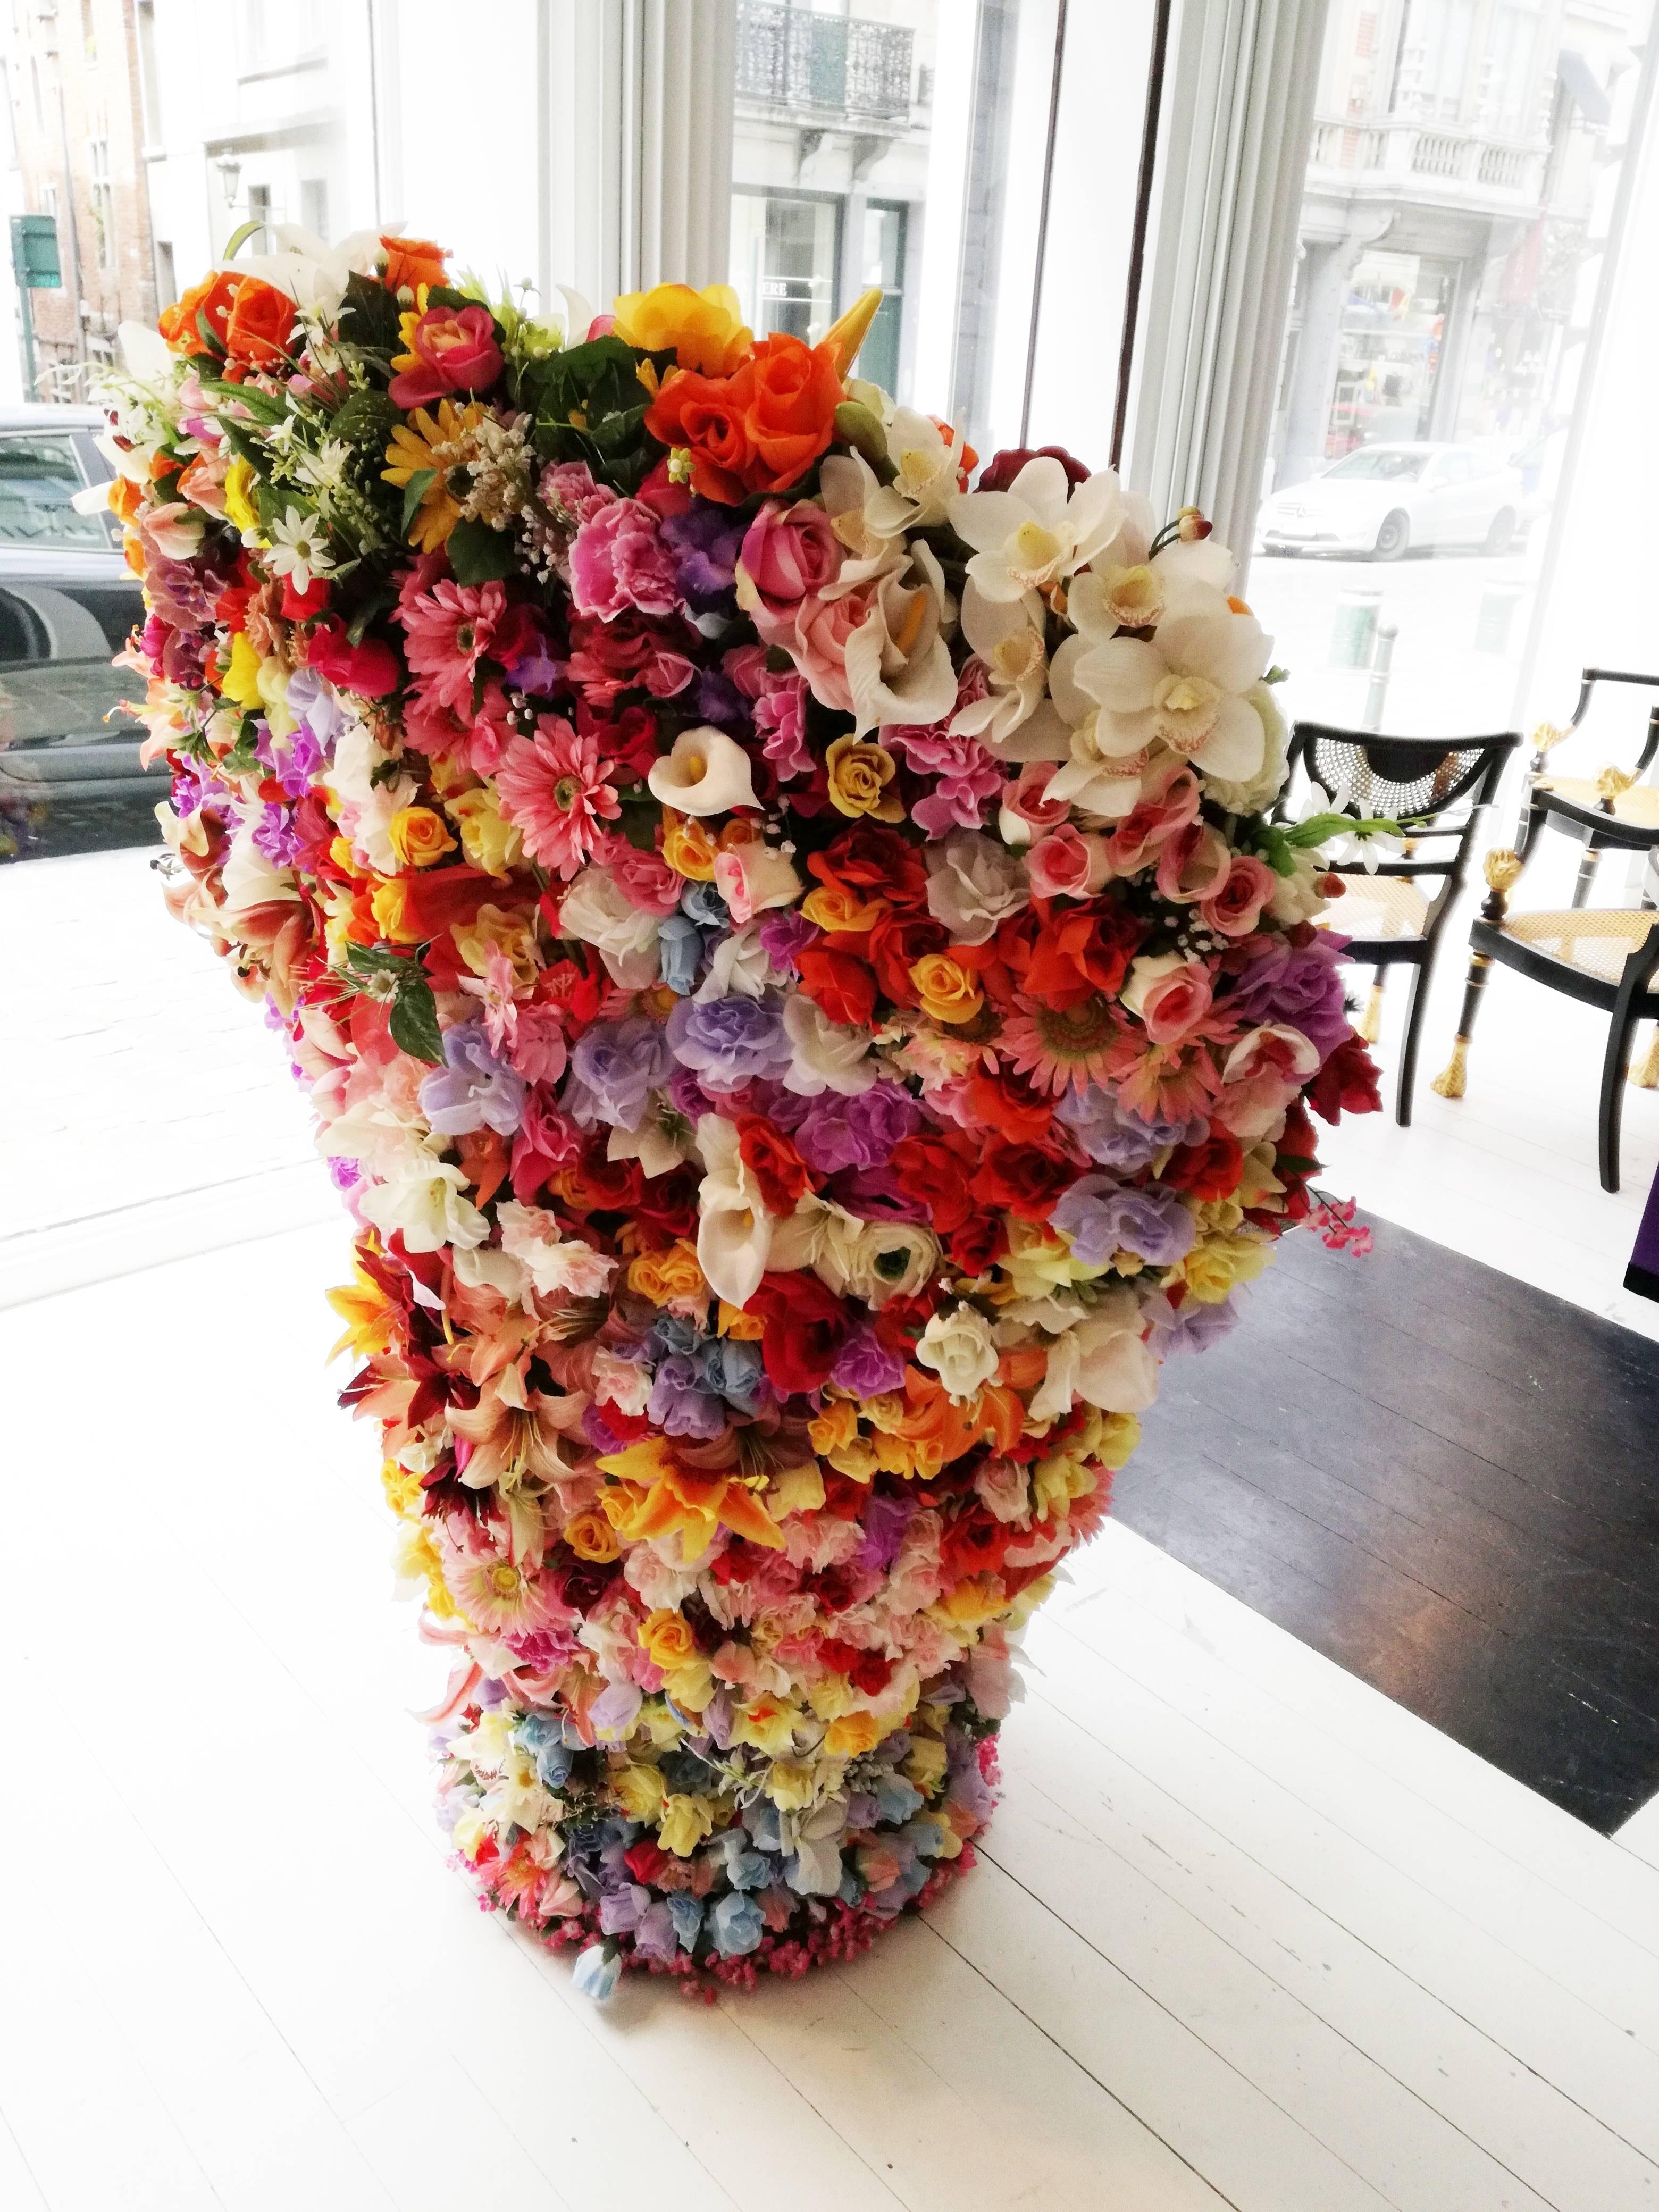 This unique piece is the work of Belgian artist Michel Marcy it has been made of a wicker support and hundreds of artificial flowers made of fabric.